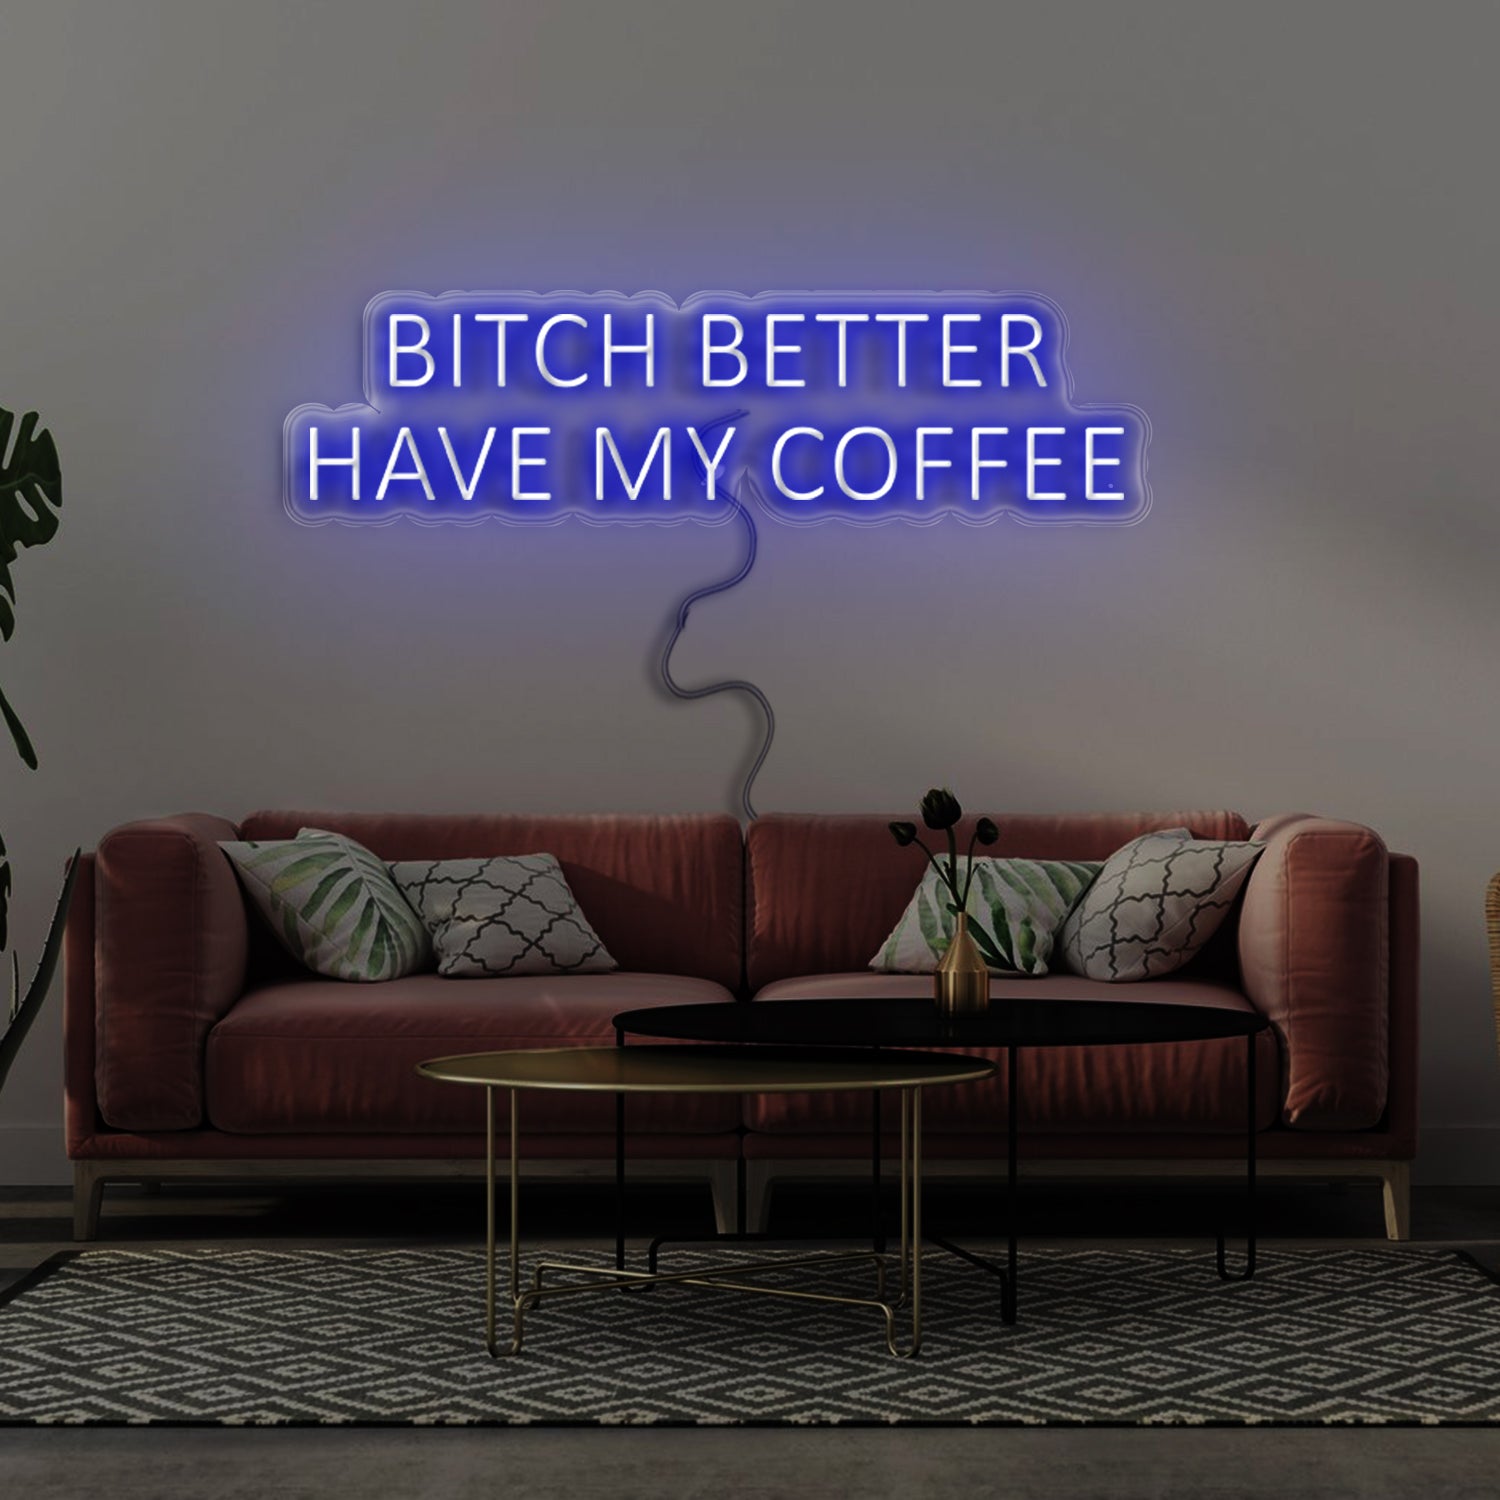 BITCH BETTER HAVE MY COFFEE - neoon.eu